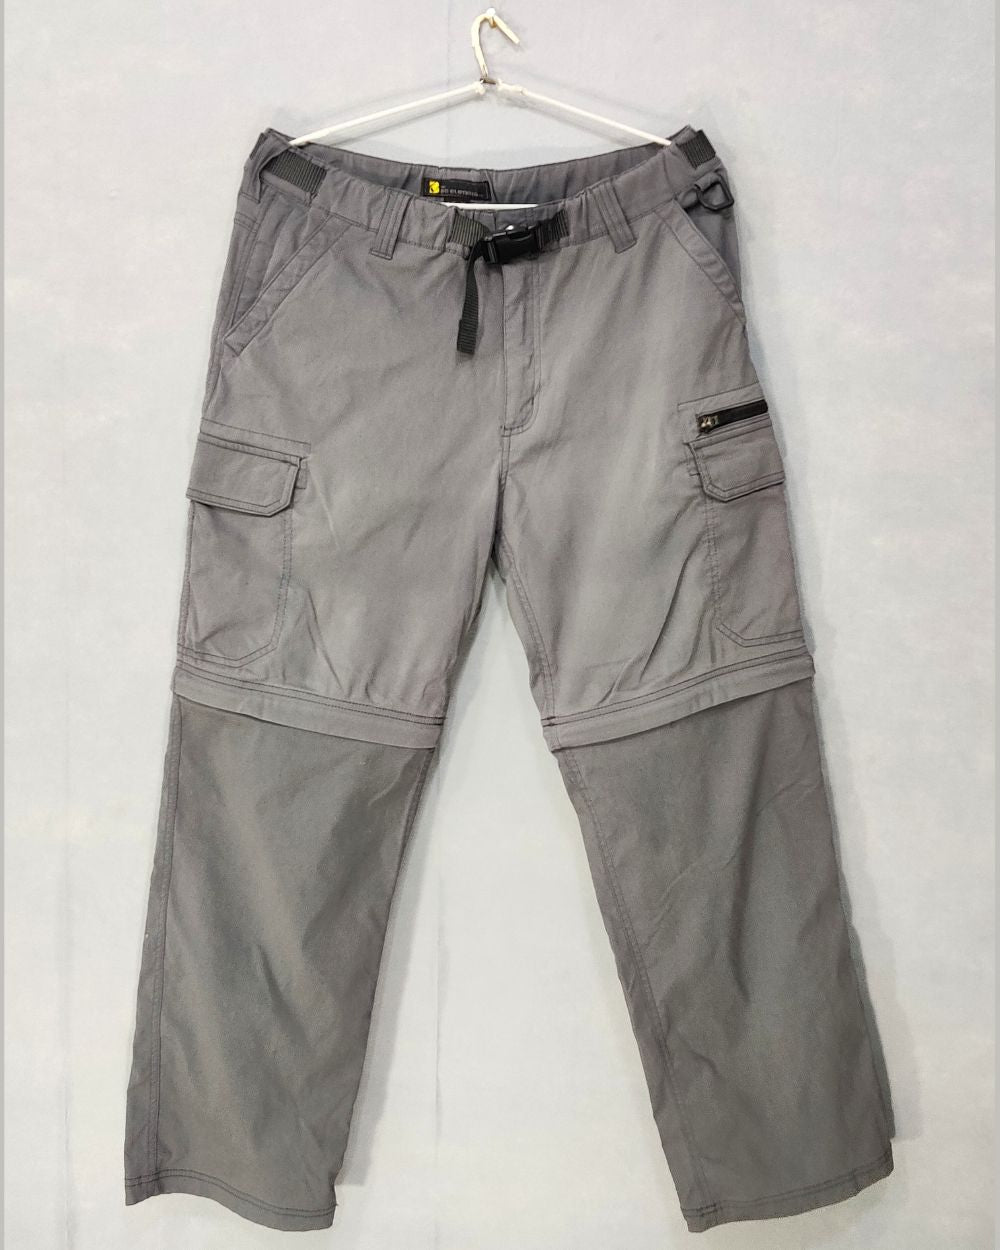 The Bc Clothing Branded Original Cotton For Men Cargo Pant